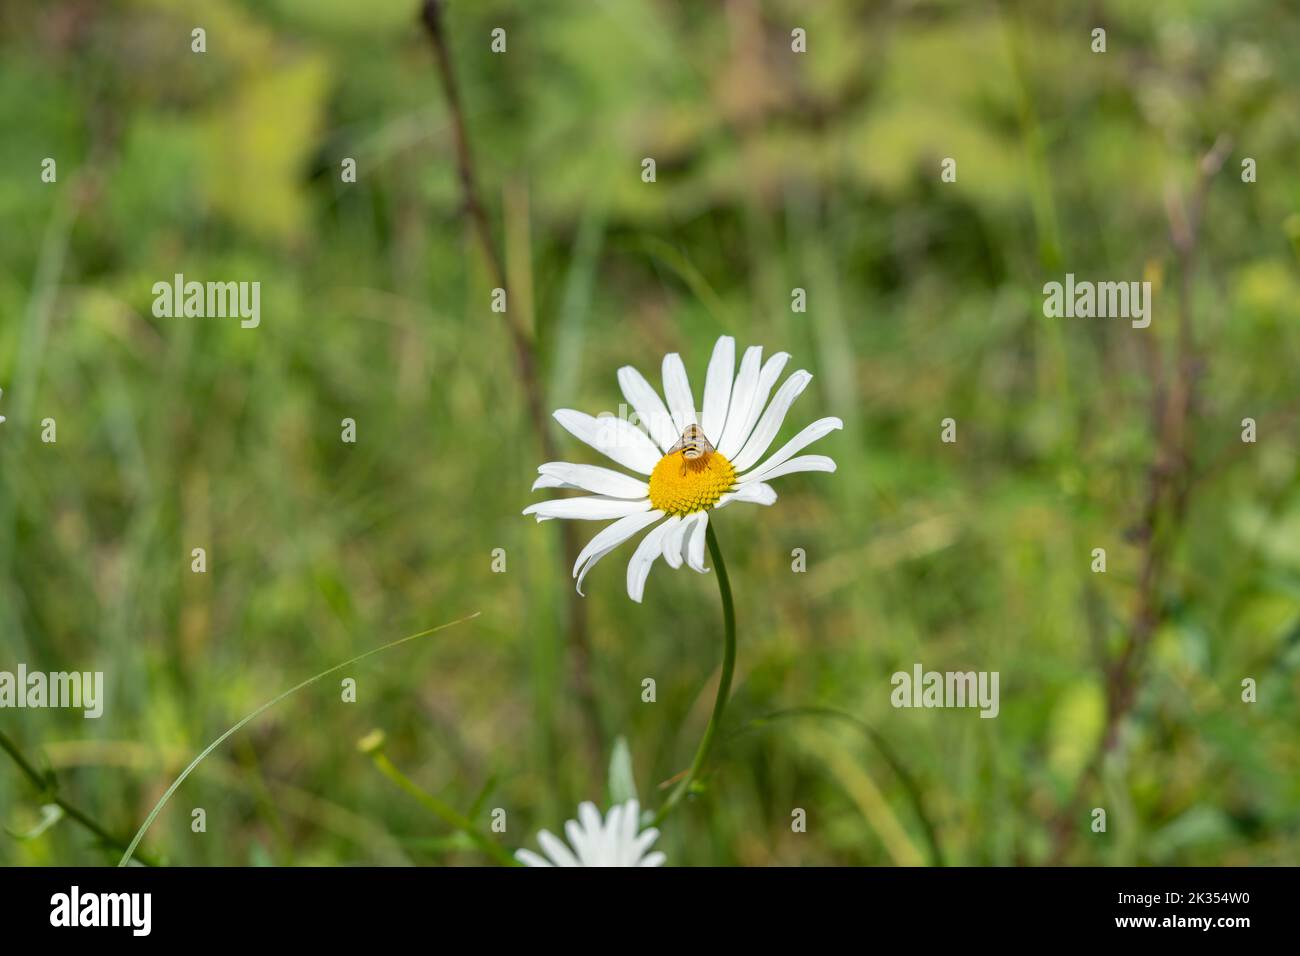 Oxeye daisy with a bee on it in the blurred green grass Stock Photo